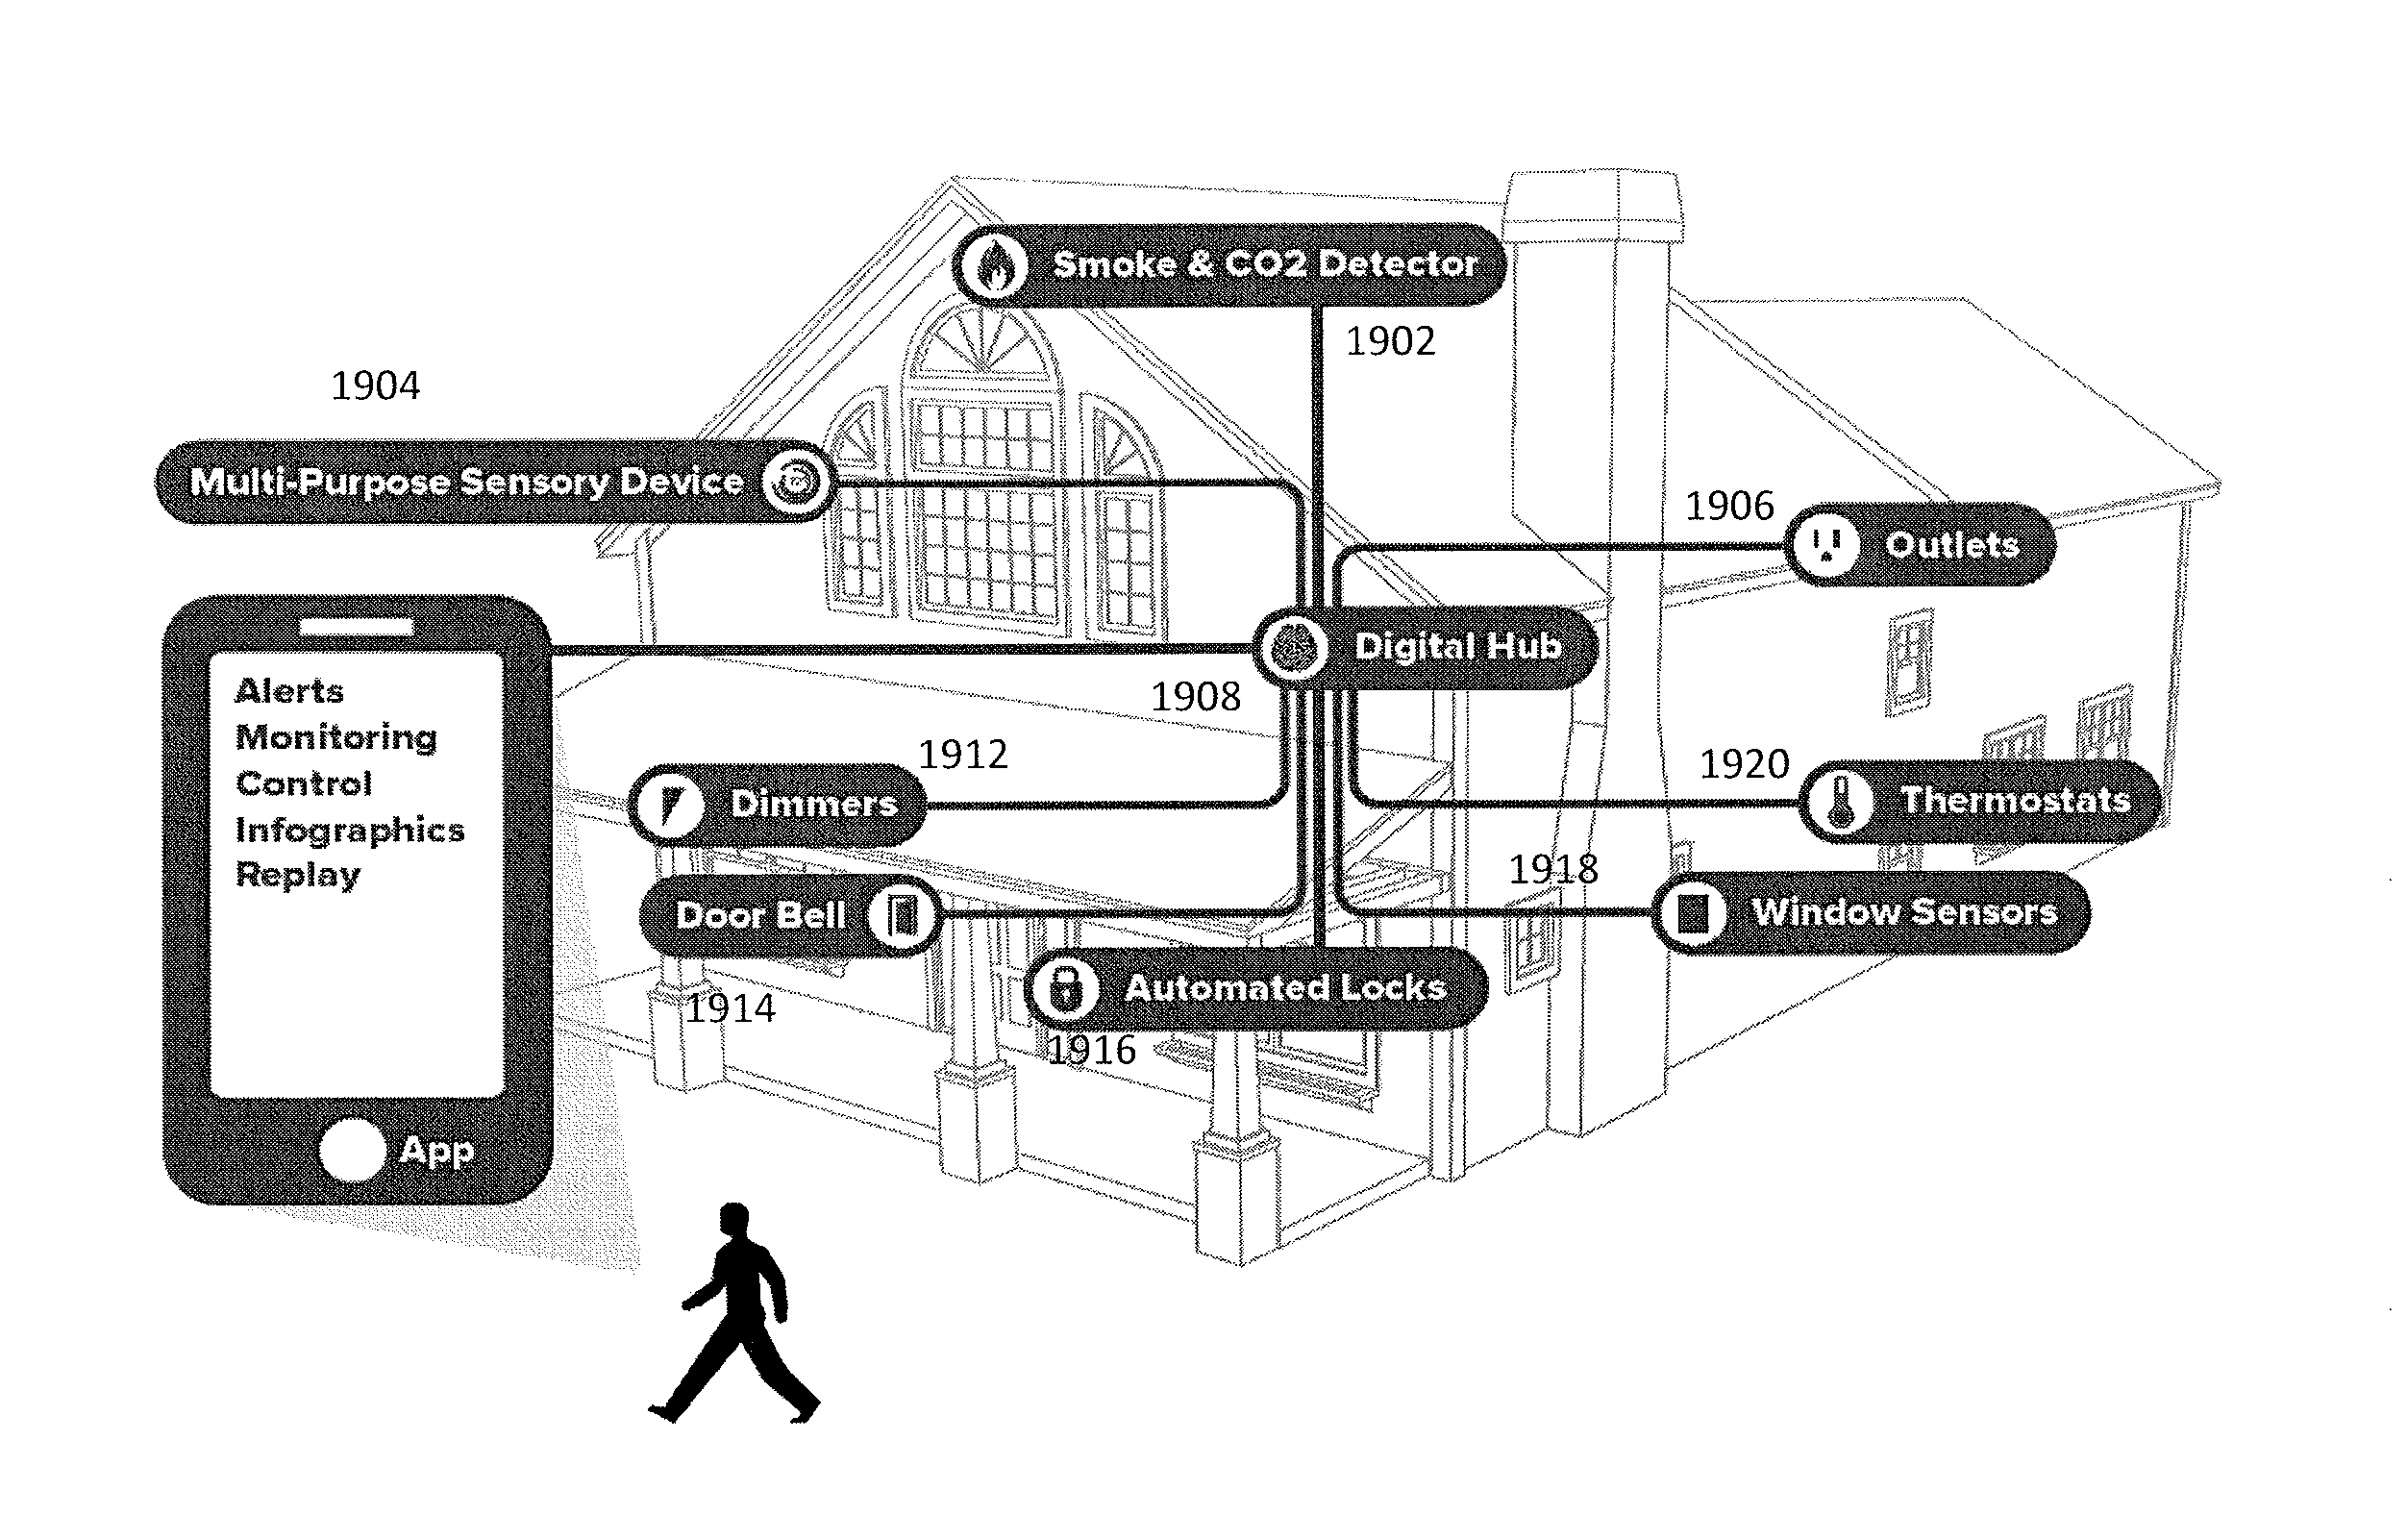 Wall-mounted interactive sensing and audio-visual node devices for networked living and work spaces